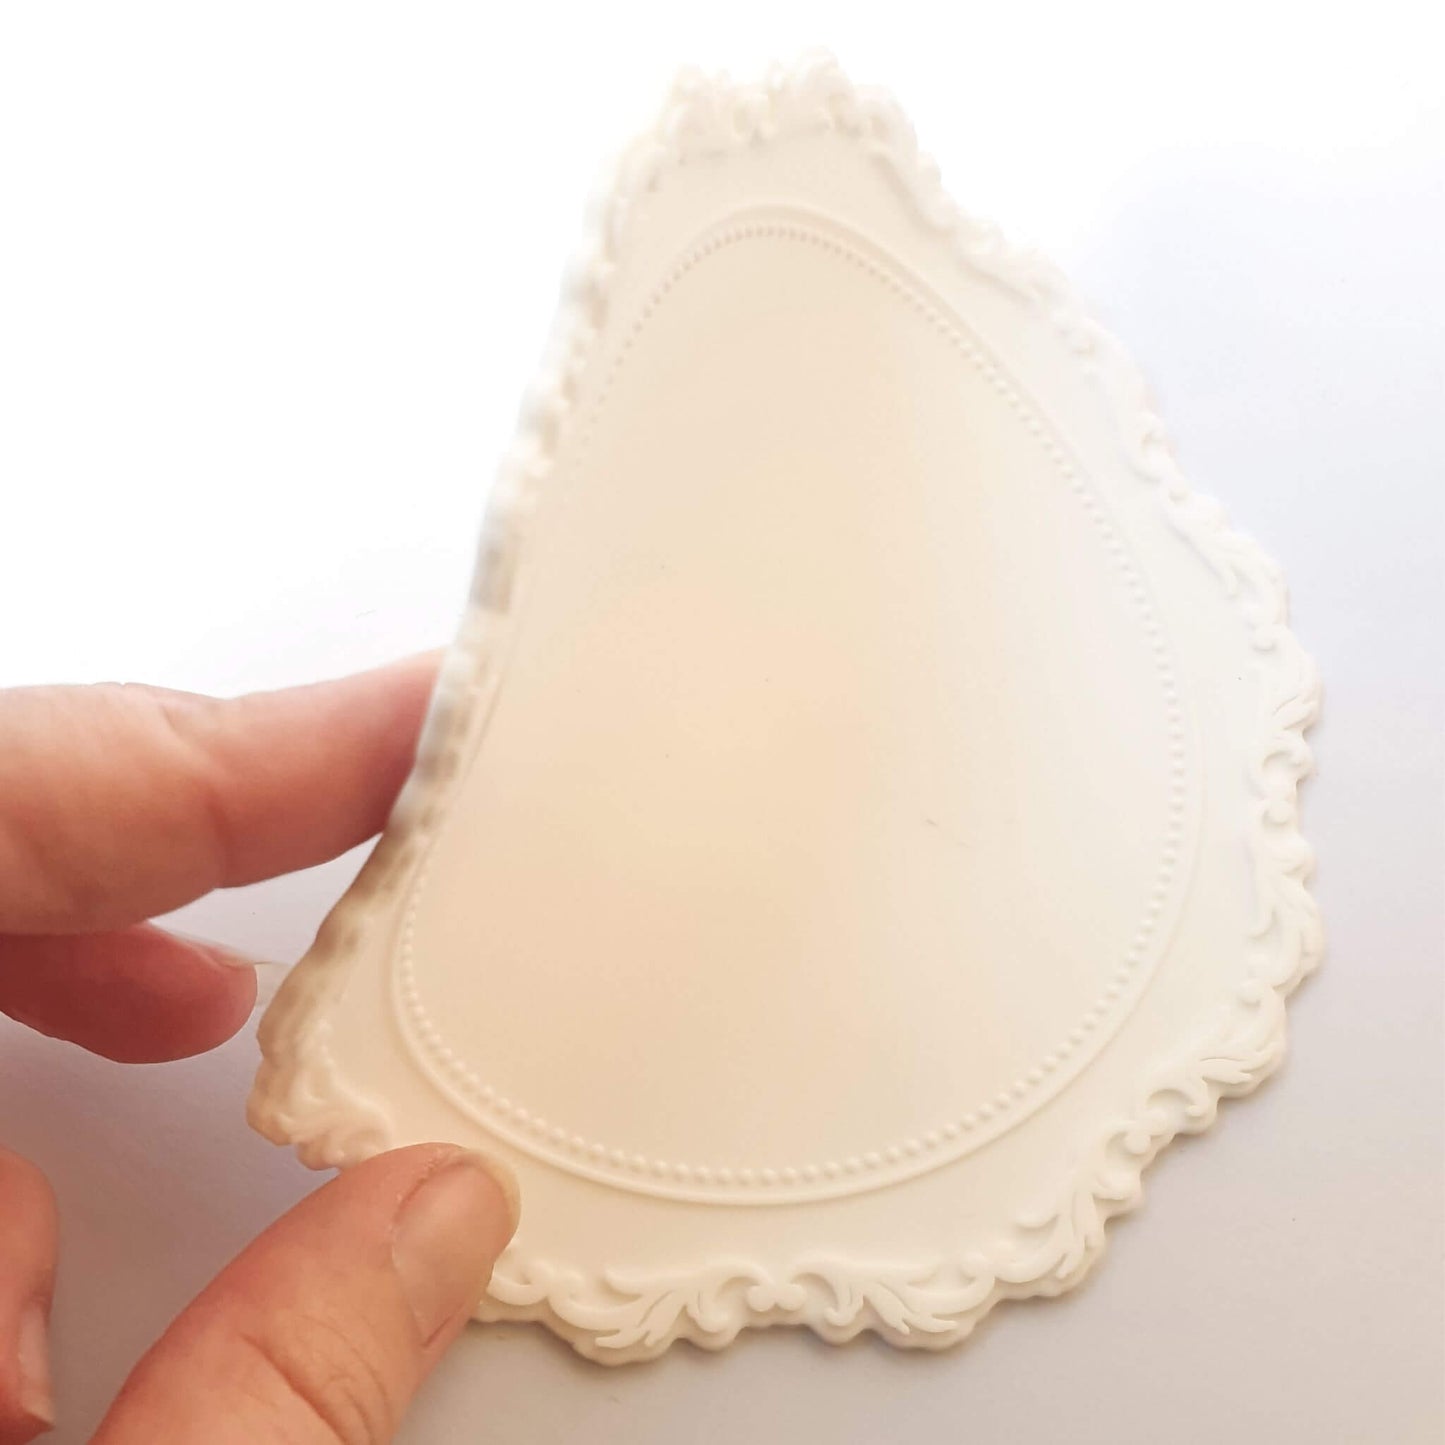 white vintage rococo style wax sealing mat being bent by hand to show fexibility